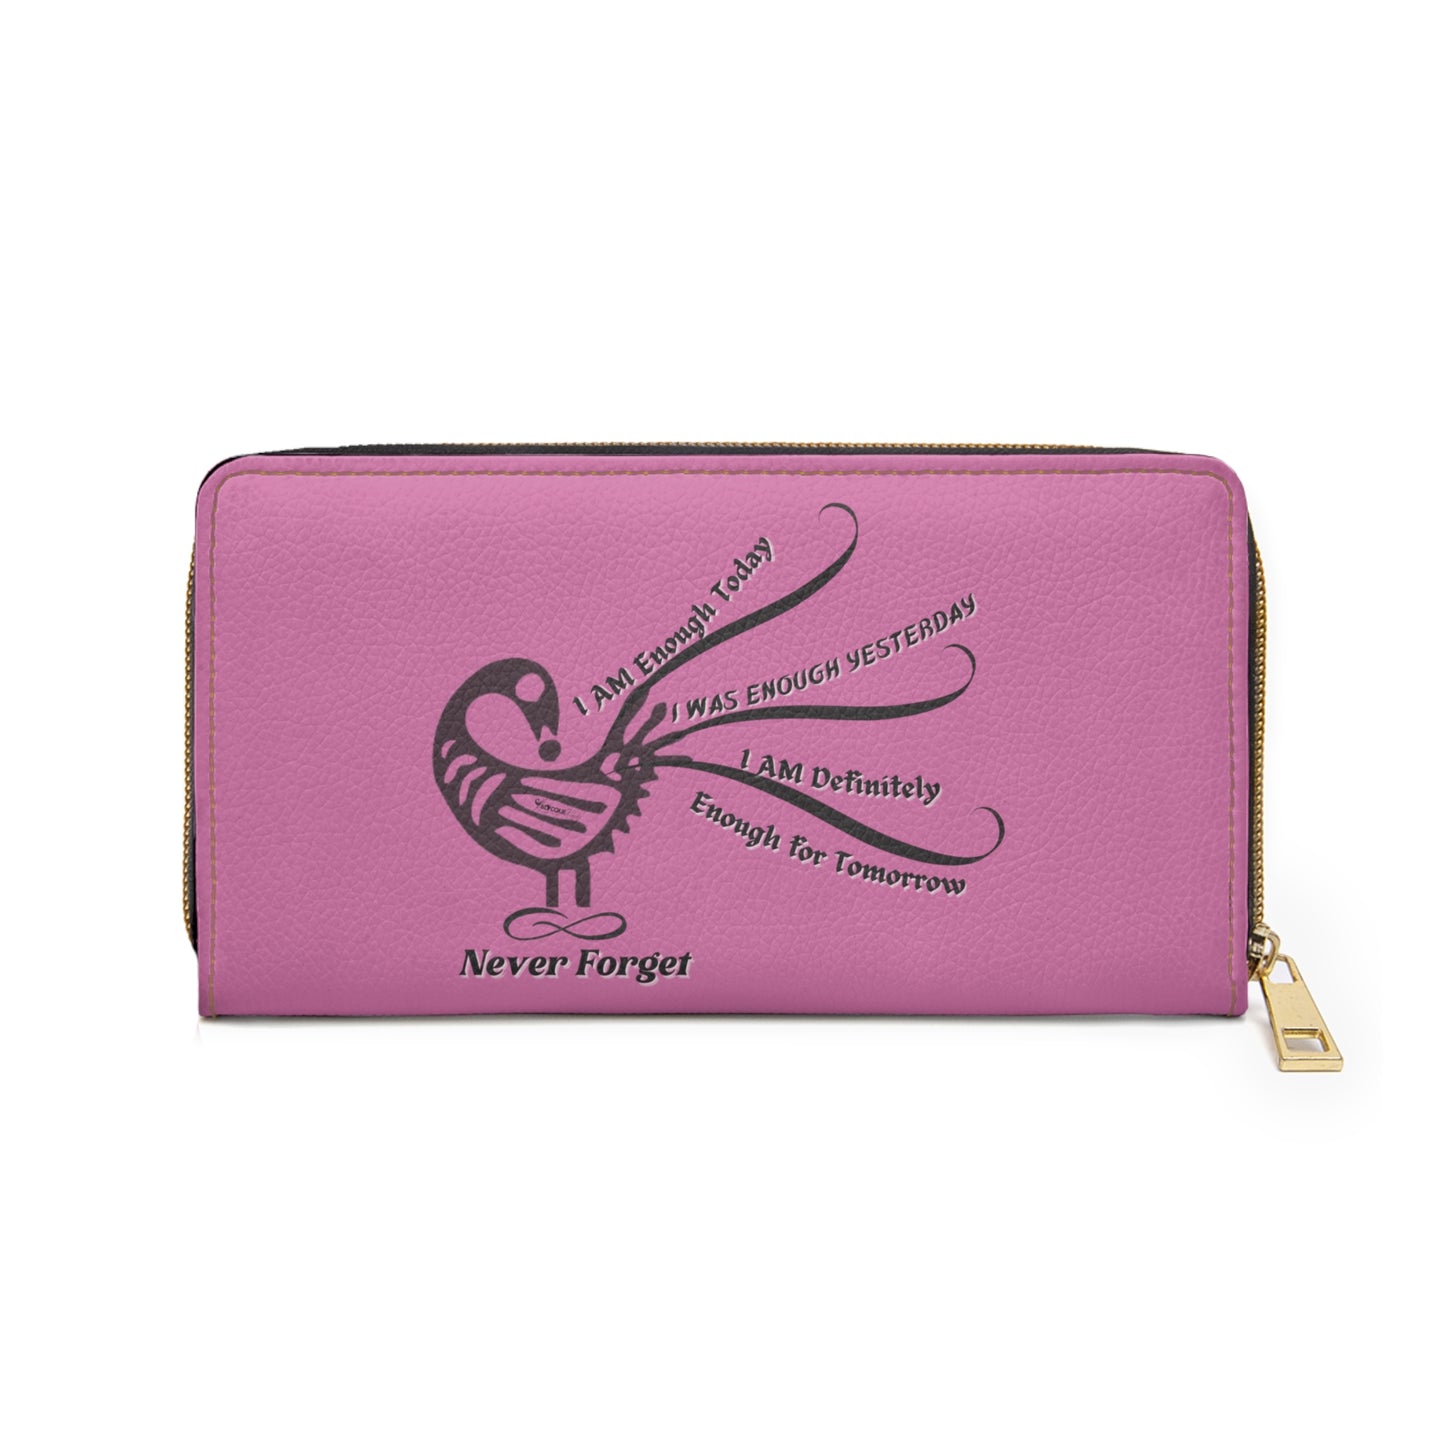 I AM More Than Enough- Positive Afrocentric Affirmation Vegan Leather Wallet Bag- Empower Your Style and Self-Love ; Pink Wallet